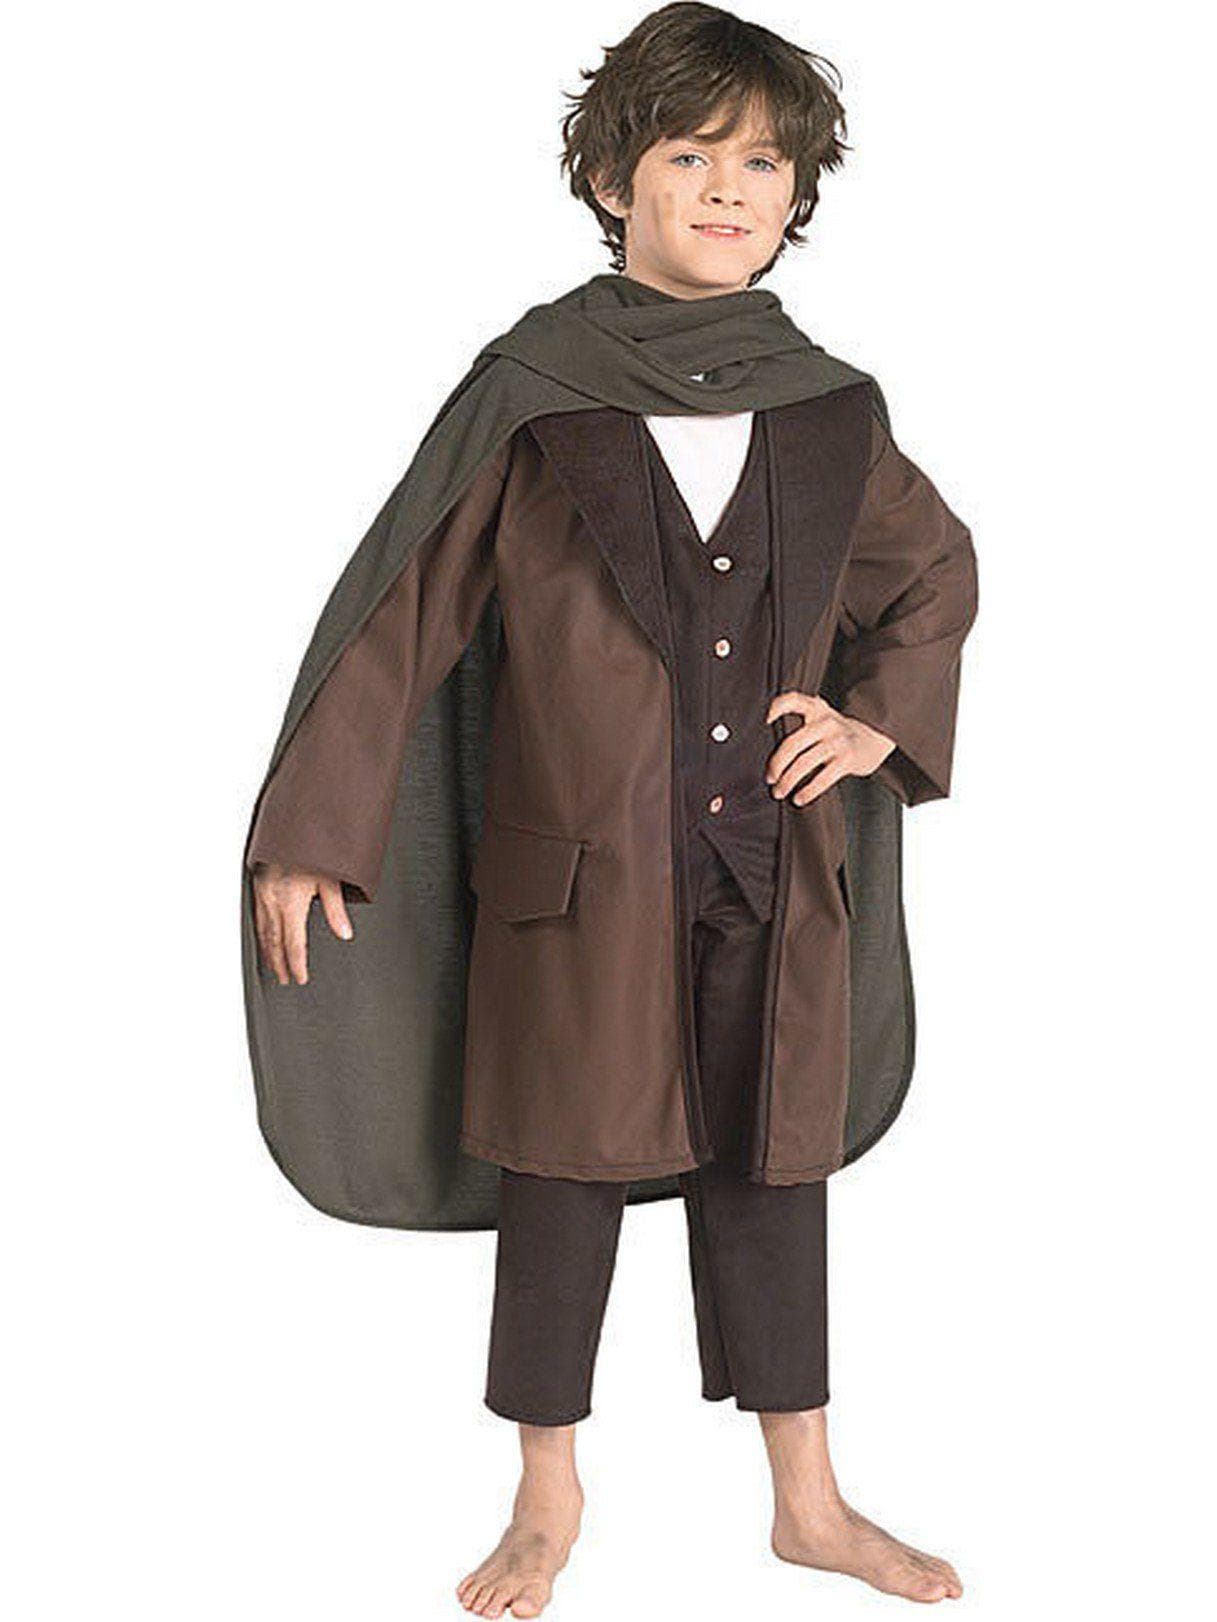 Kids The Hobbit/Lord Of The Rings Frodo Costume - costumes.com